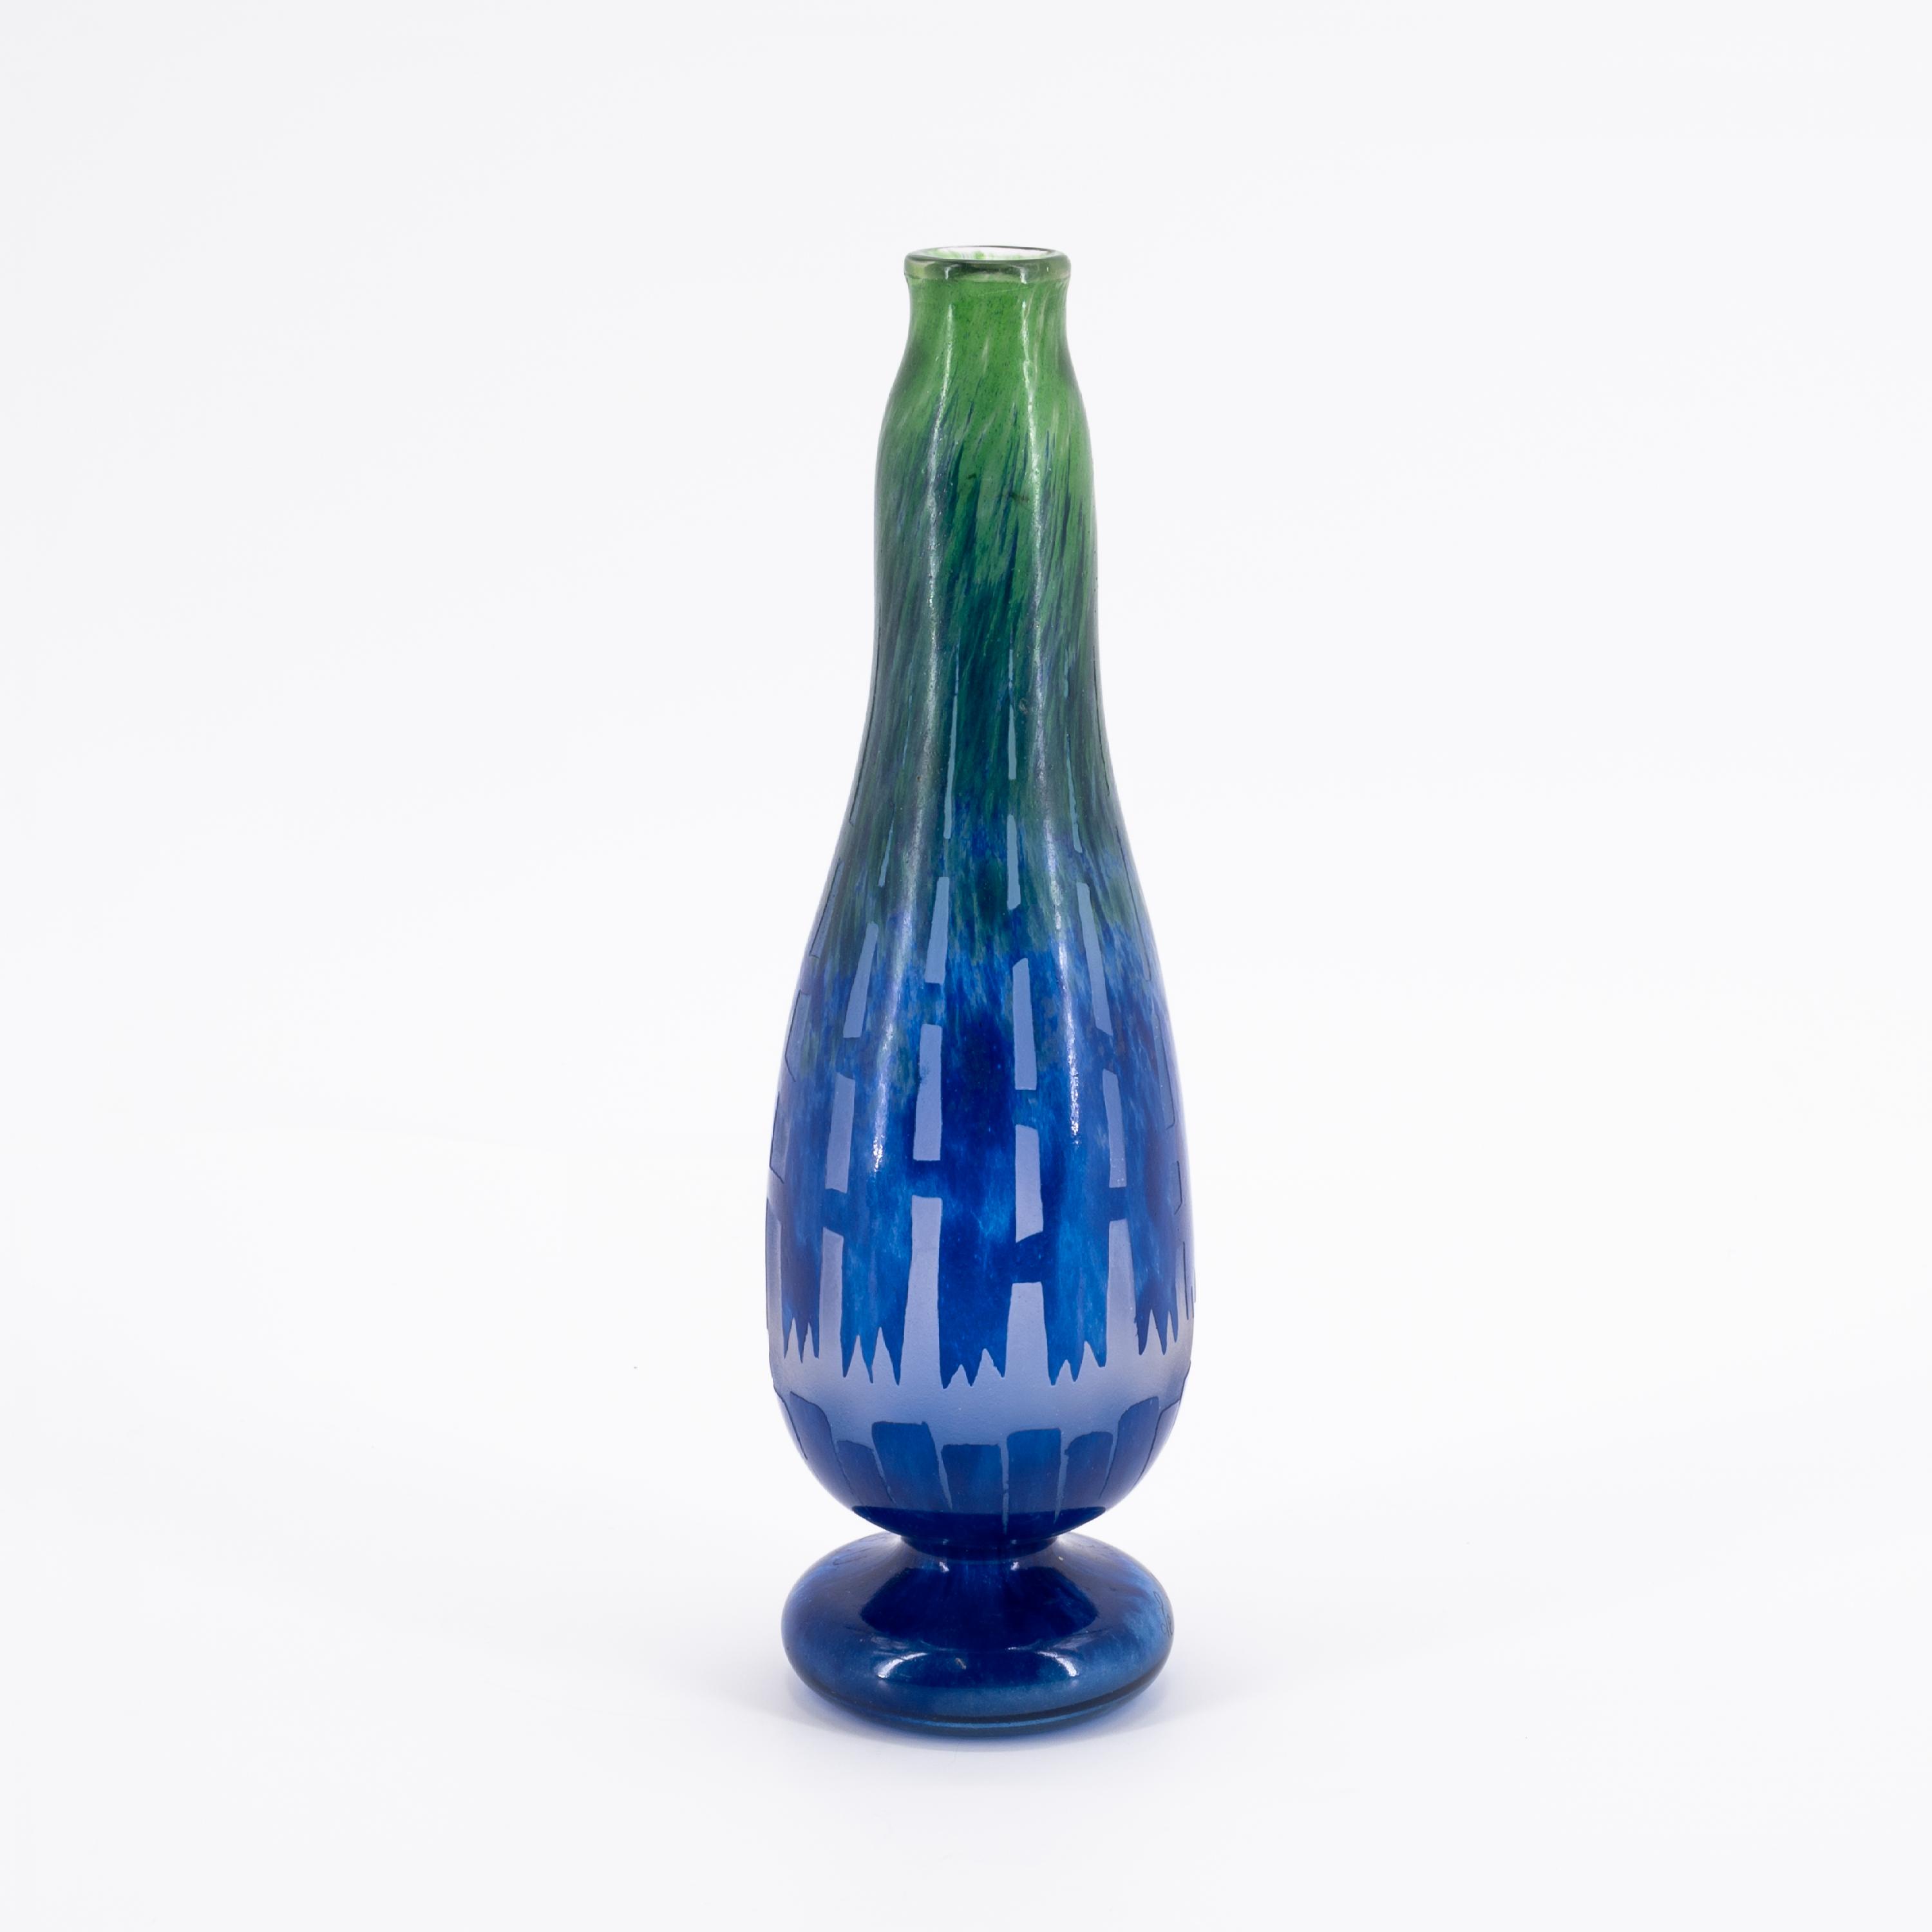 GLASS SOLIFLOR VASE WITH DECOR "CHICORÉES" - Image 2 of 6